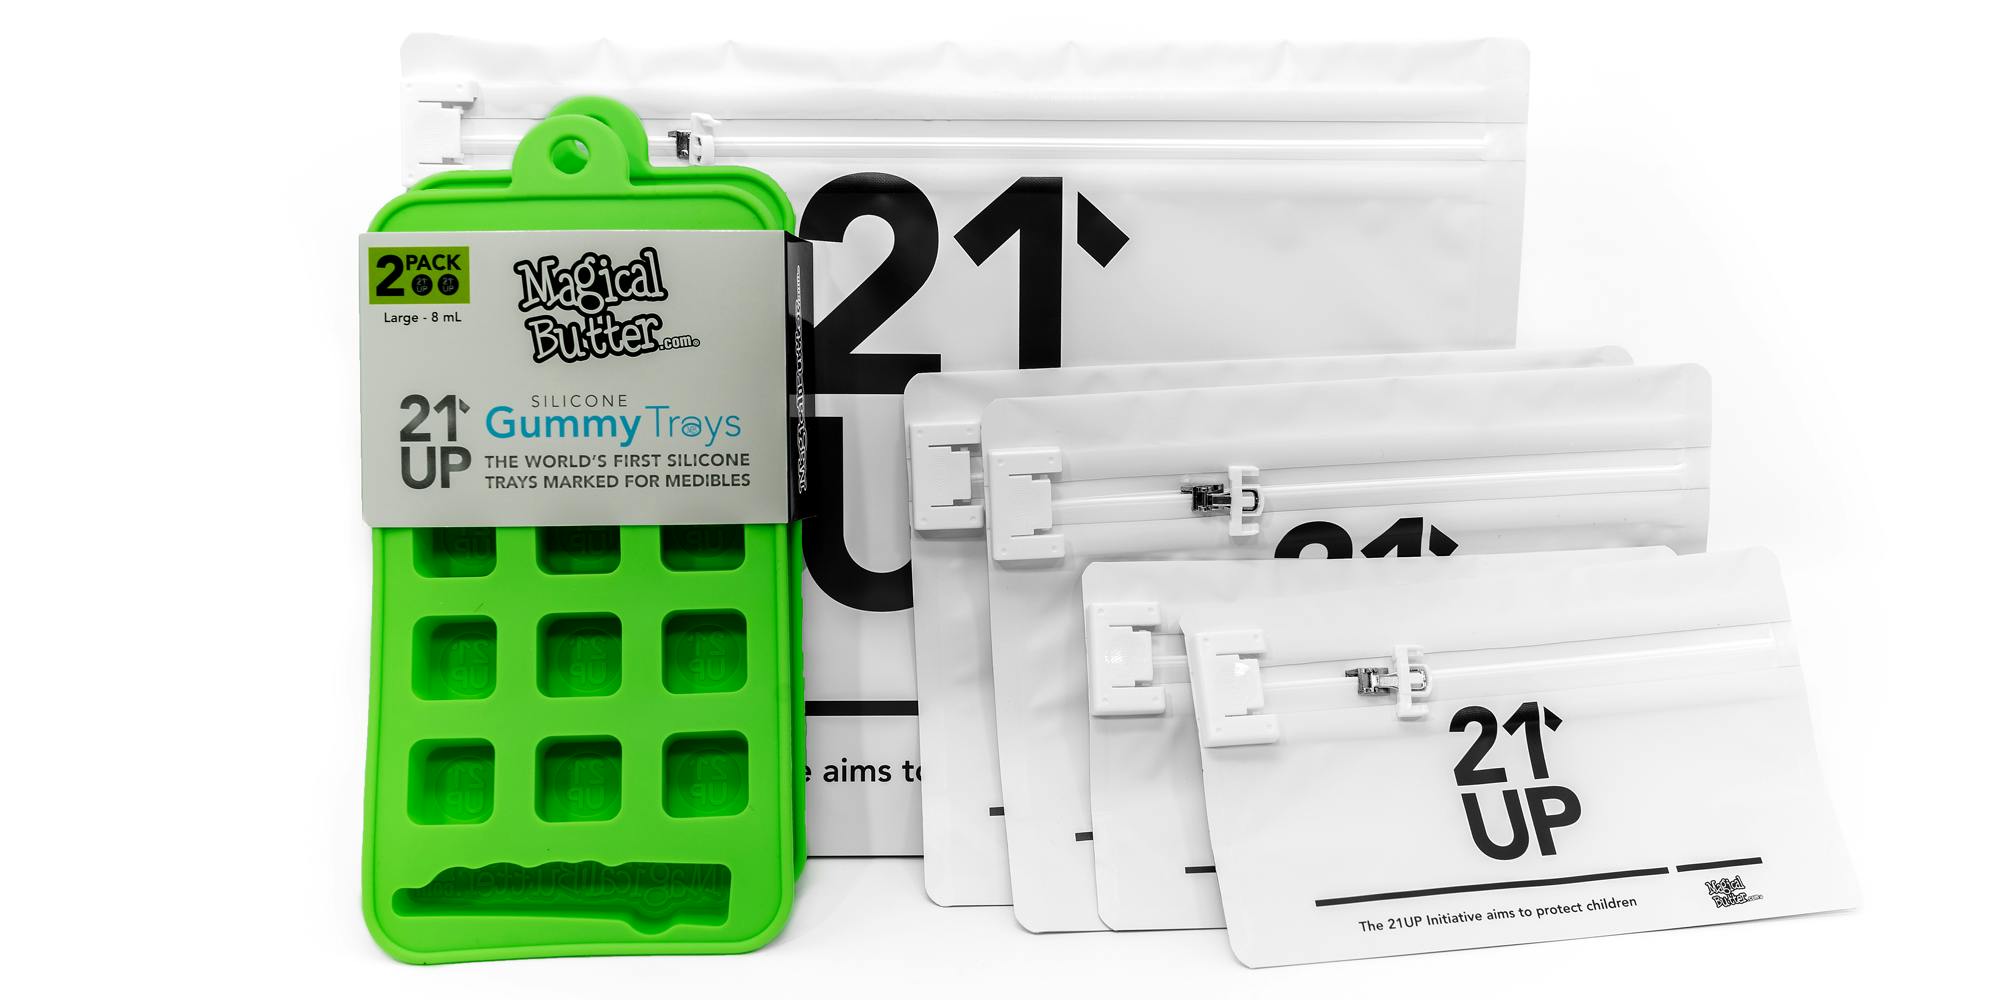 MB's 21UP Exit Bags are the safest solution to keeping your edibles away from the wrong hands